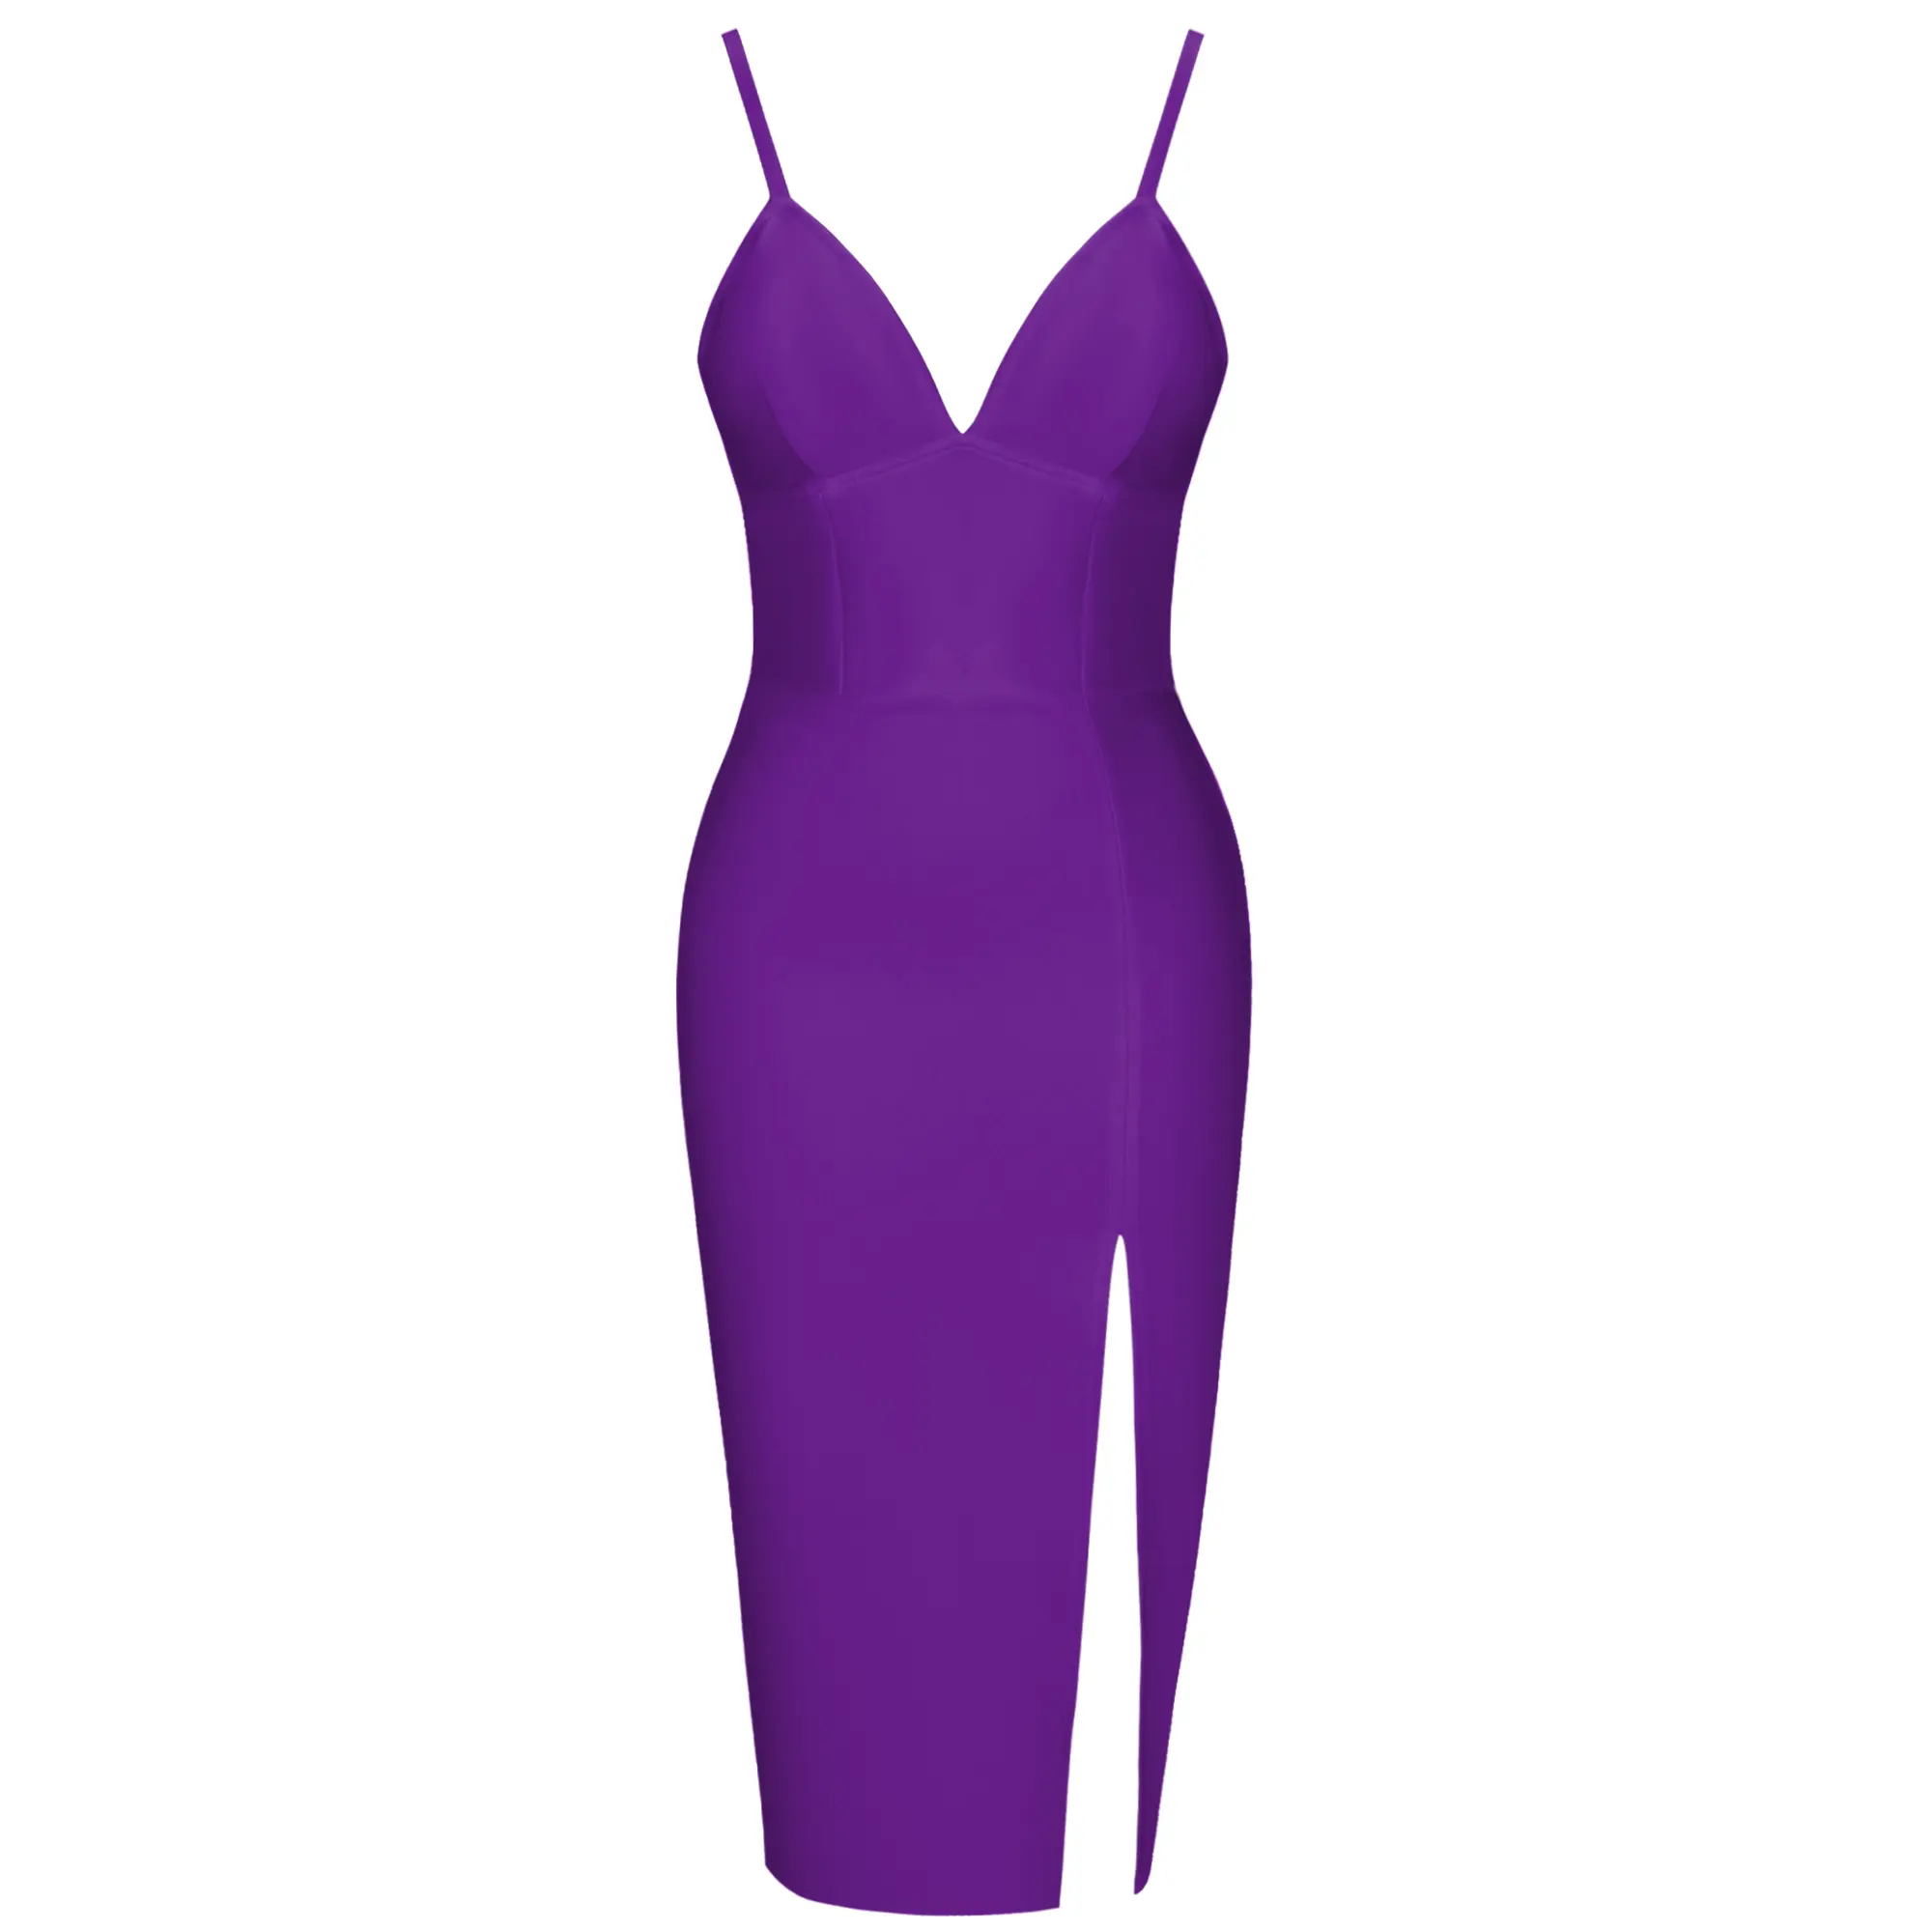 Midi Bandage Dress for New Year 2022 Women Purple Bandage Dress Bodycon Elegant Sexy Party Dress Evening Club Outfit